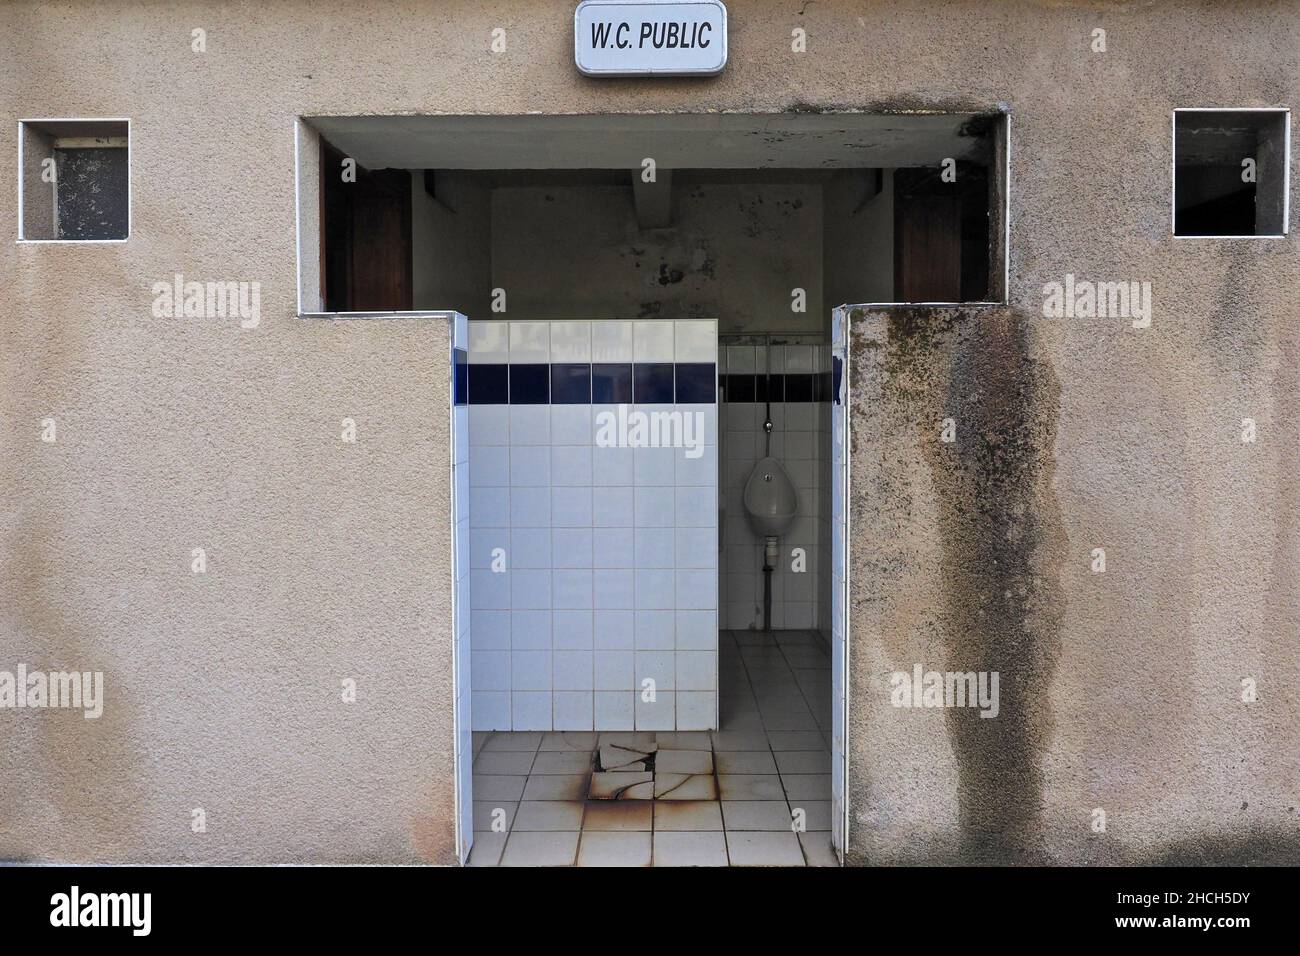 Public toilet with urinal, France Stock Photo